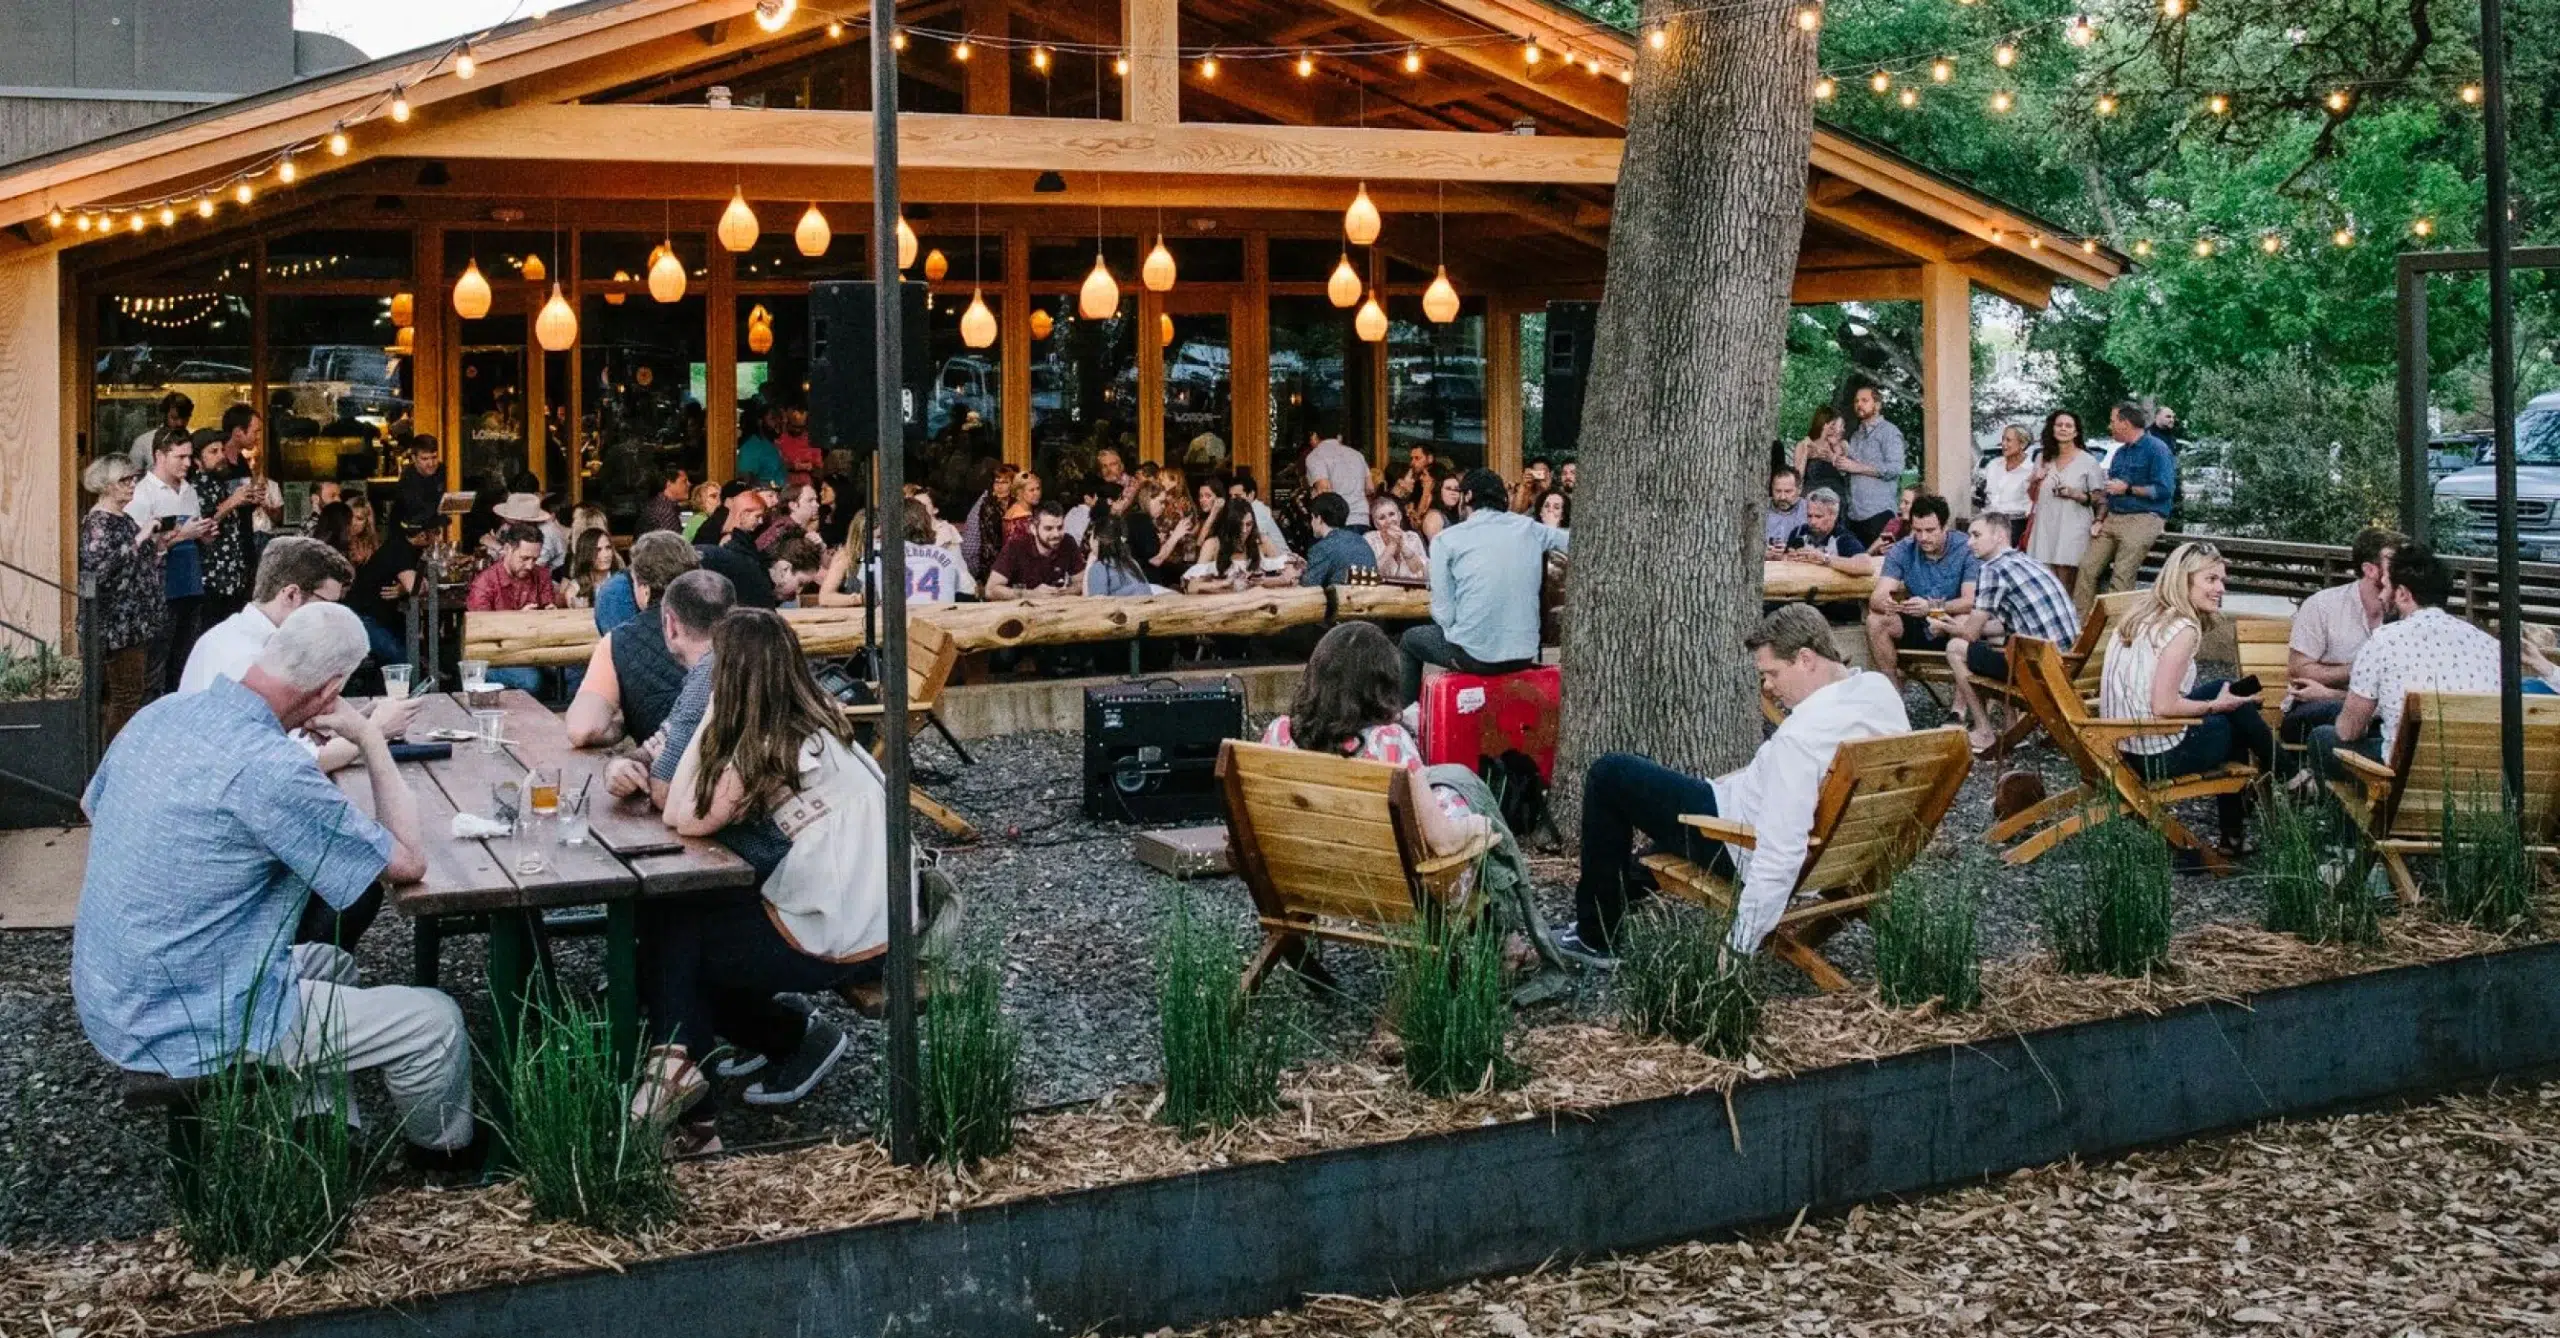 Groups of people sitting around wooden tables and in wooden chairs on the Loro Austin patio.